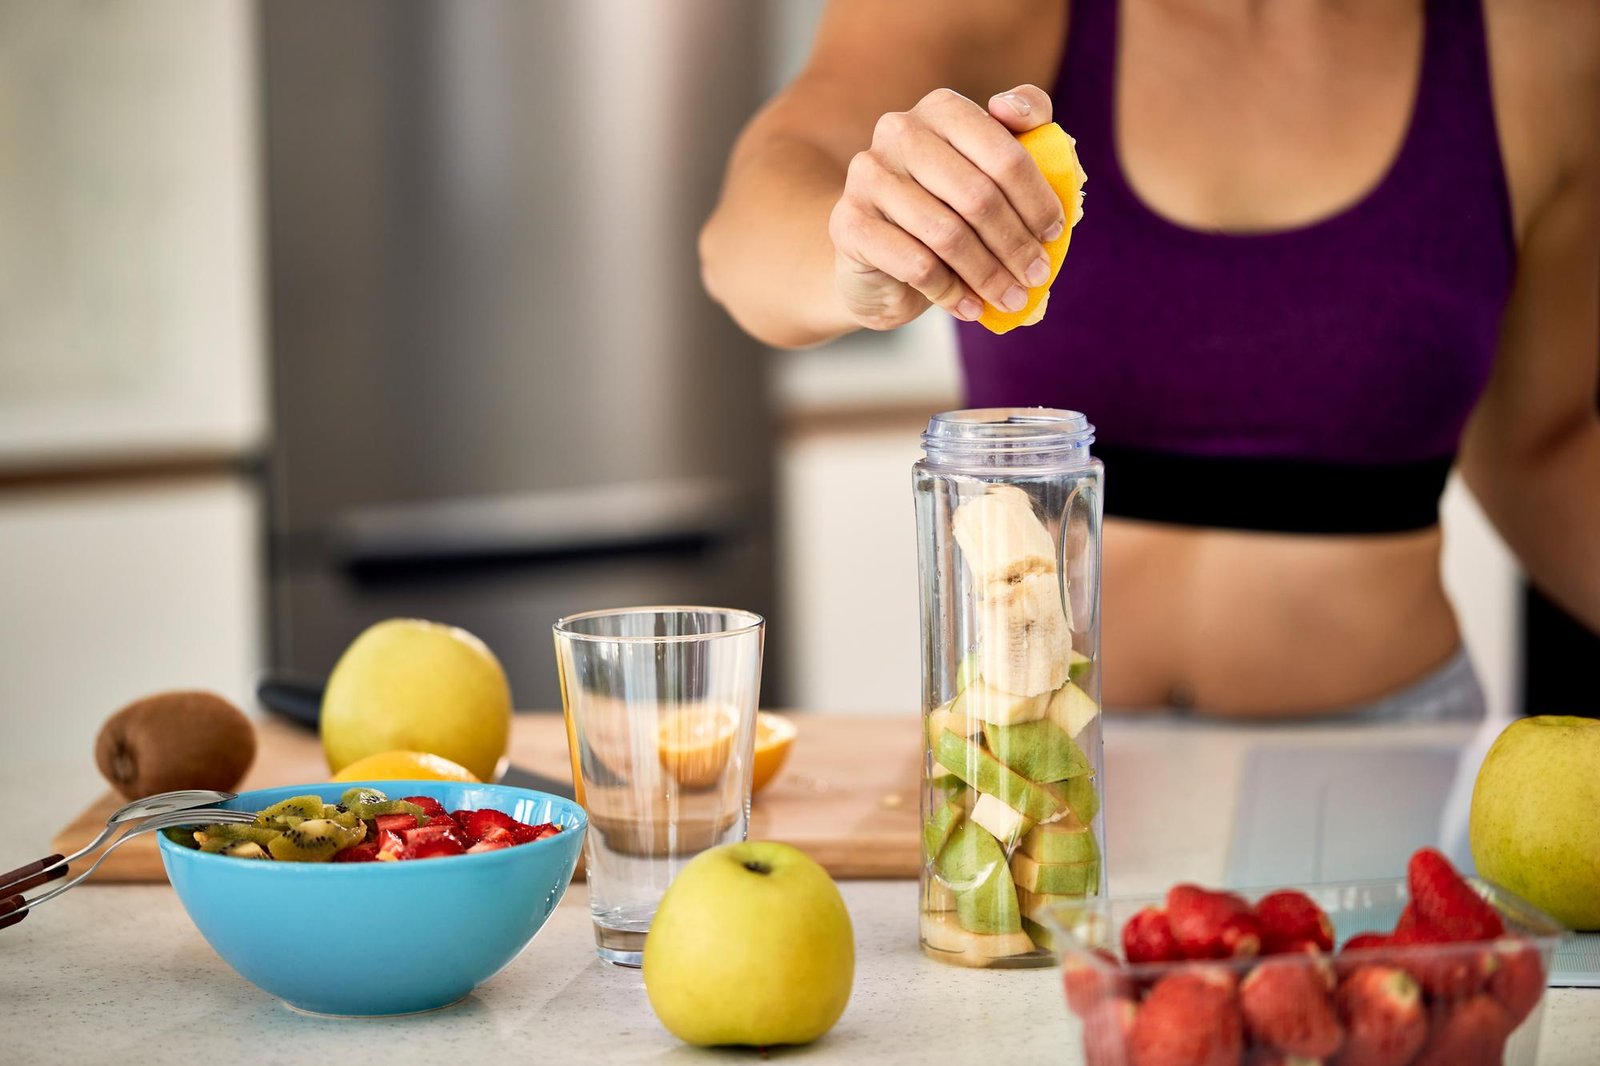 You are currently viewing Revitalize and Slim Down: 5 Appetizing Smoothie Recipes for Weight Loss and Energy Introduction